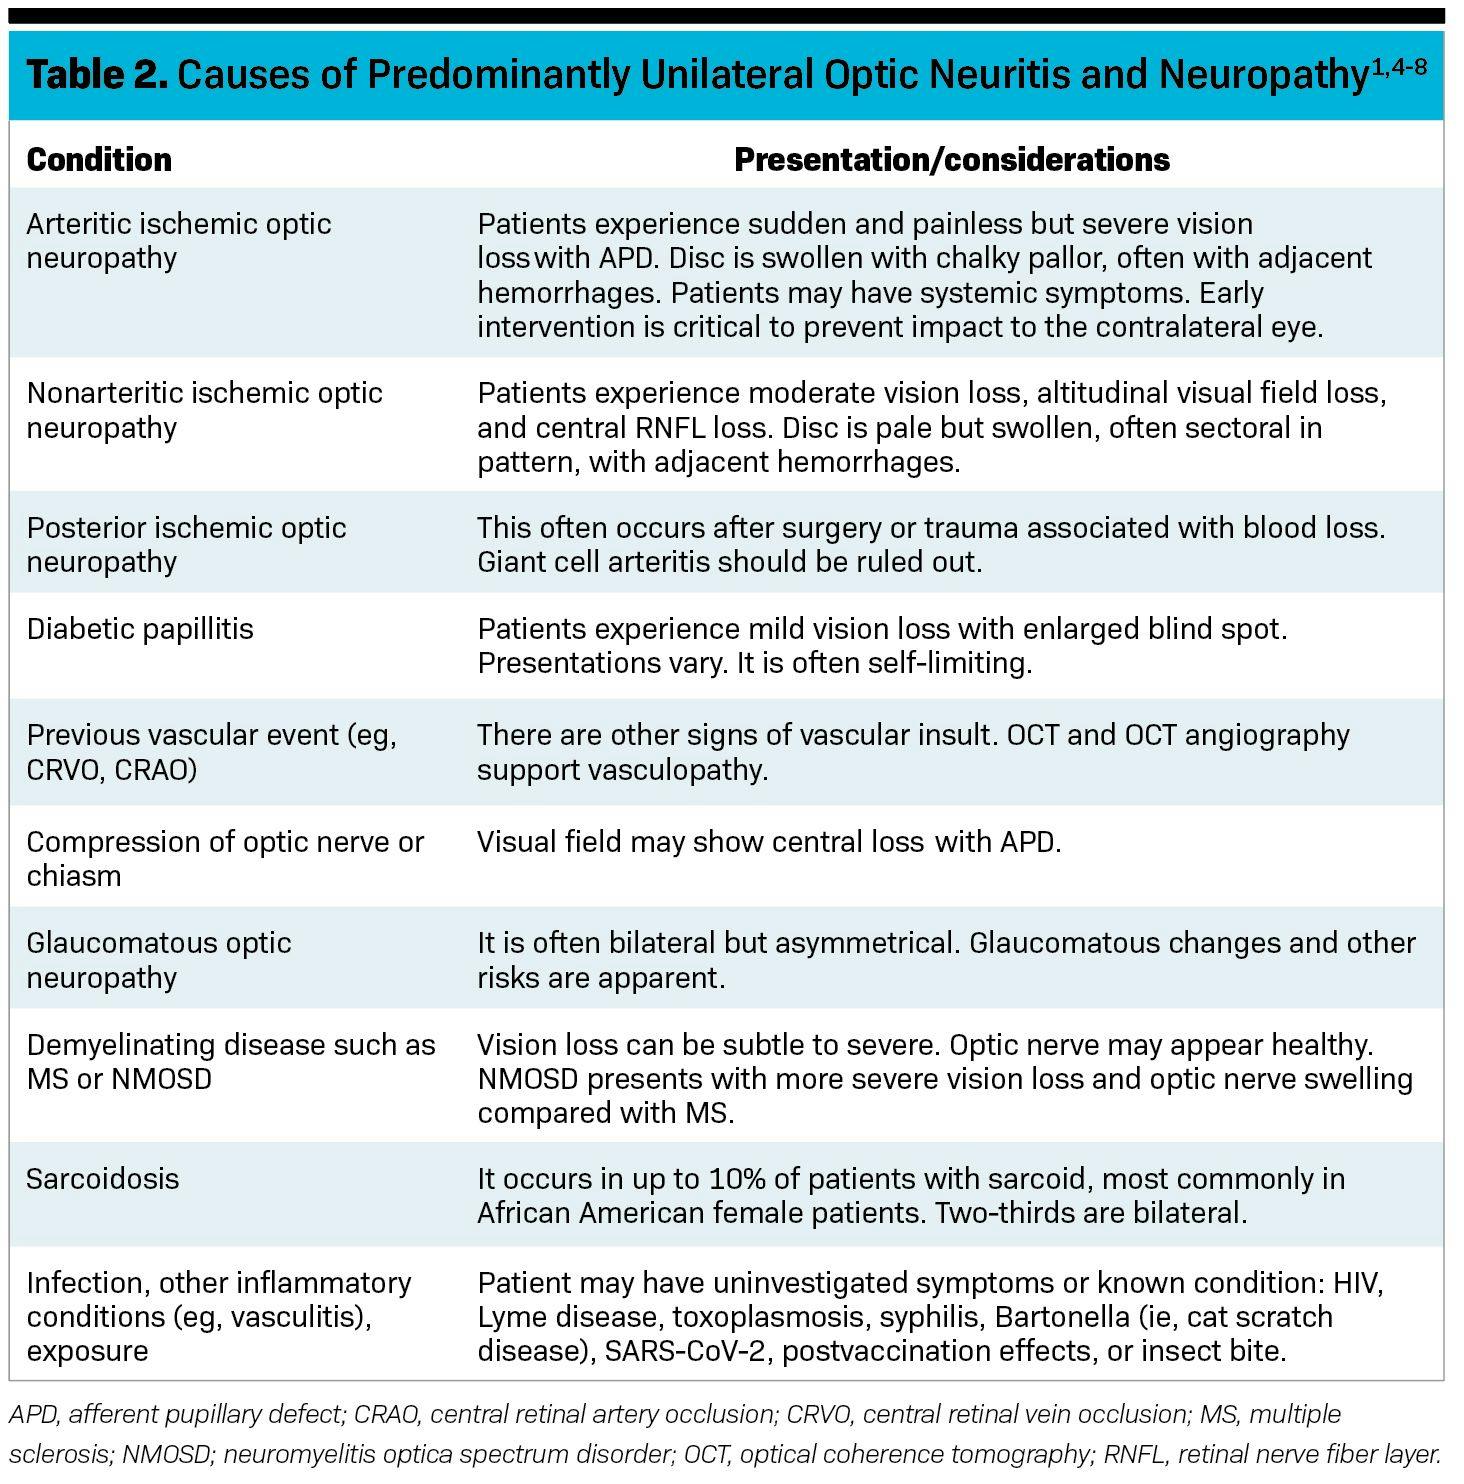 Table 2. Causes of predominantly unilateral optic neuritis and neuropathy